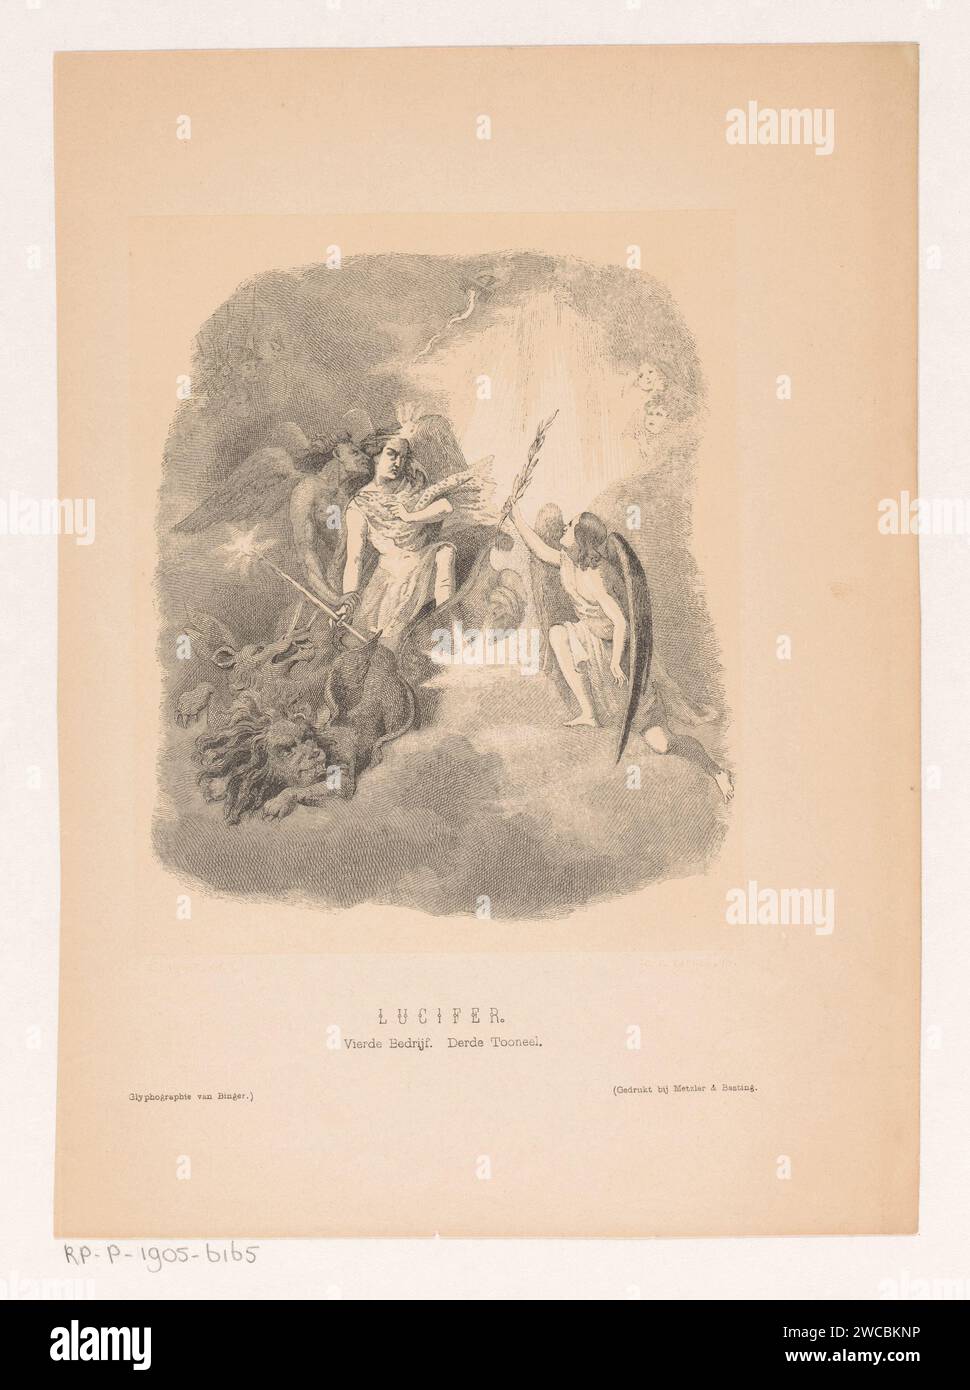 Rafaël tries to bring Lucifer to reason, Edouard Taurel, 1856 - 1872 print Lucifer is in his chariot and is offered an olive branch of peace by doctors' angel Rafaël. Amsterdam paper  devil(s) and demons: Lucifer. the Archangel Raphael Stock Photo